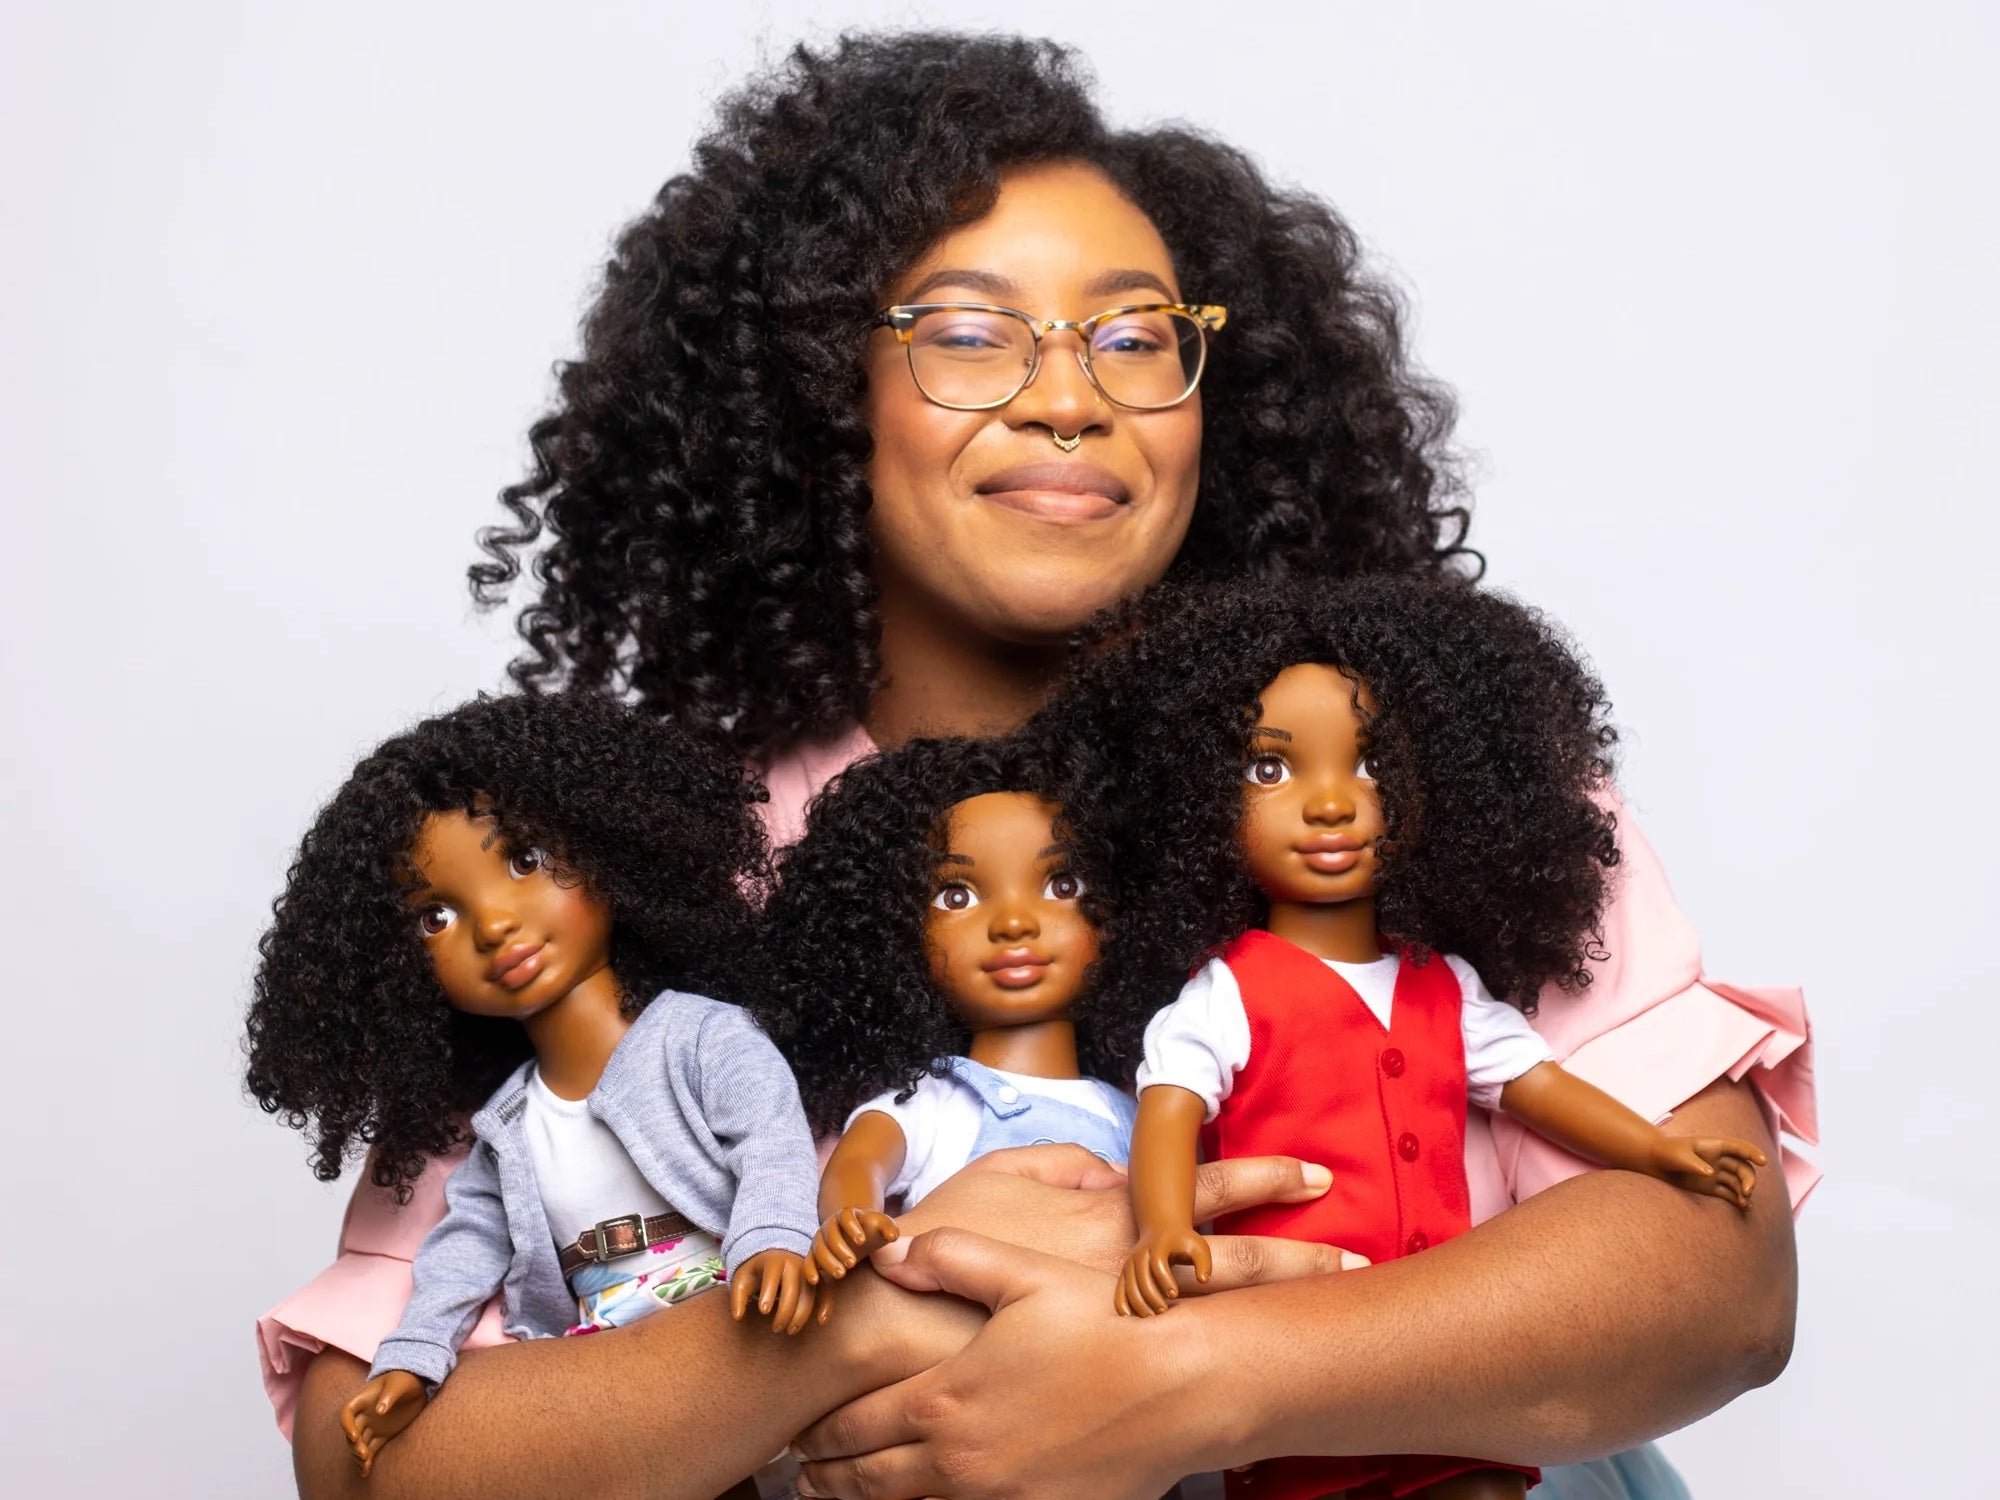 Portrait of the founder of Health Roots Dolls